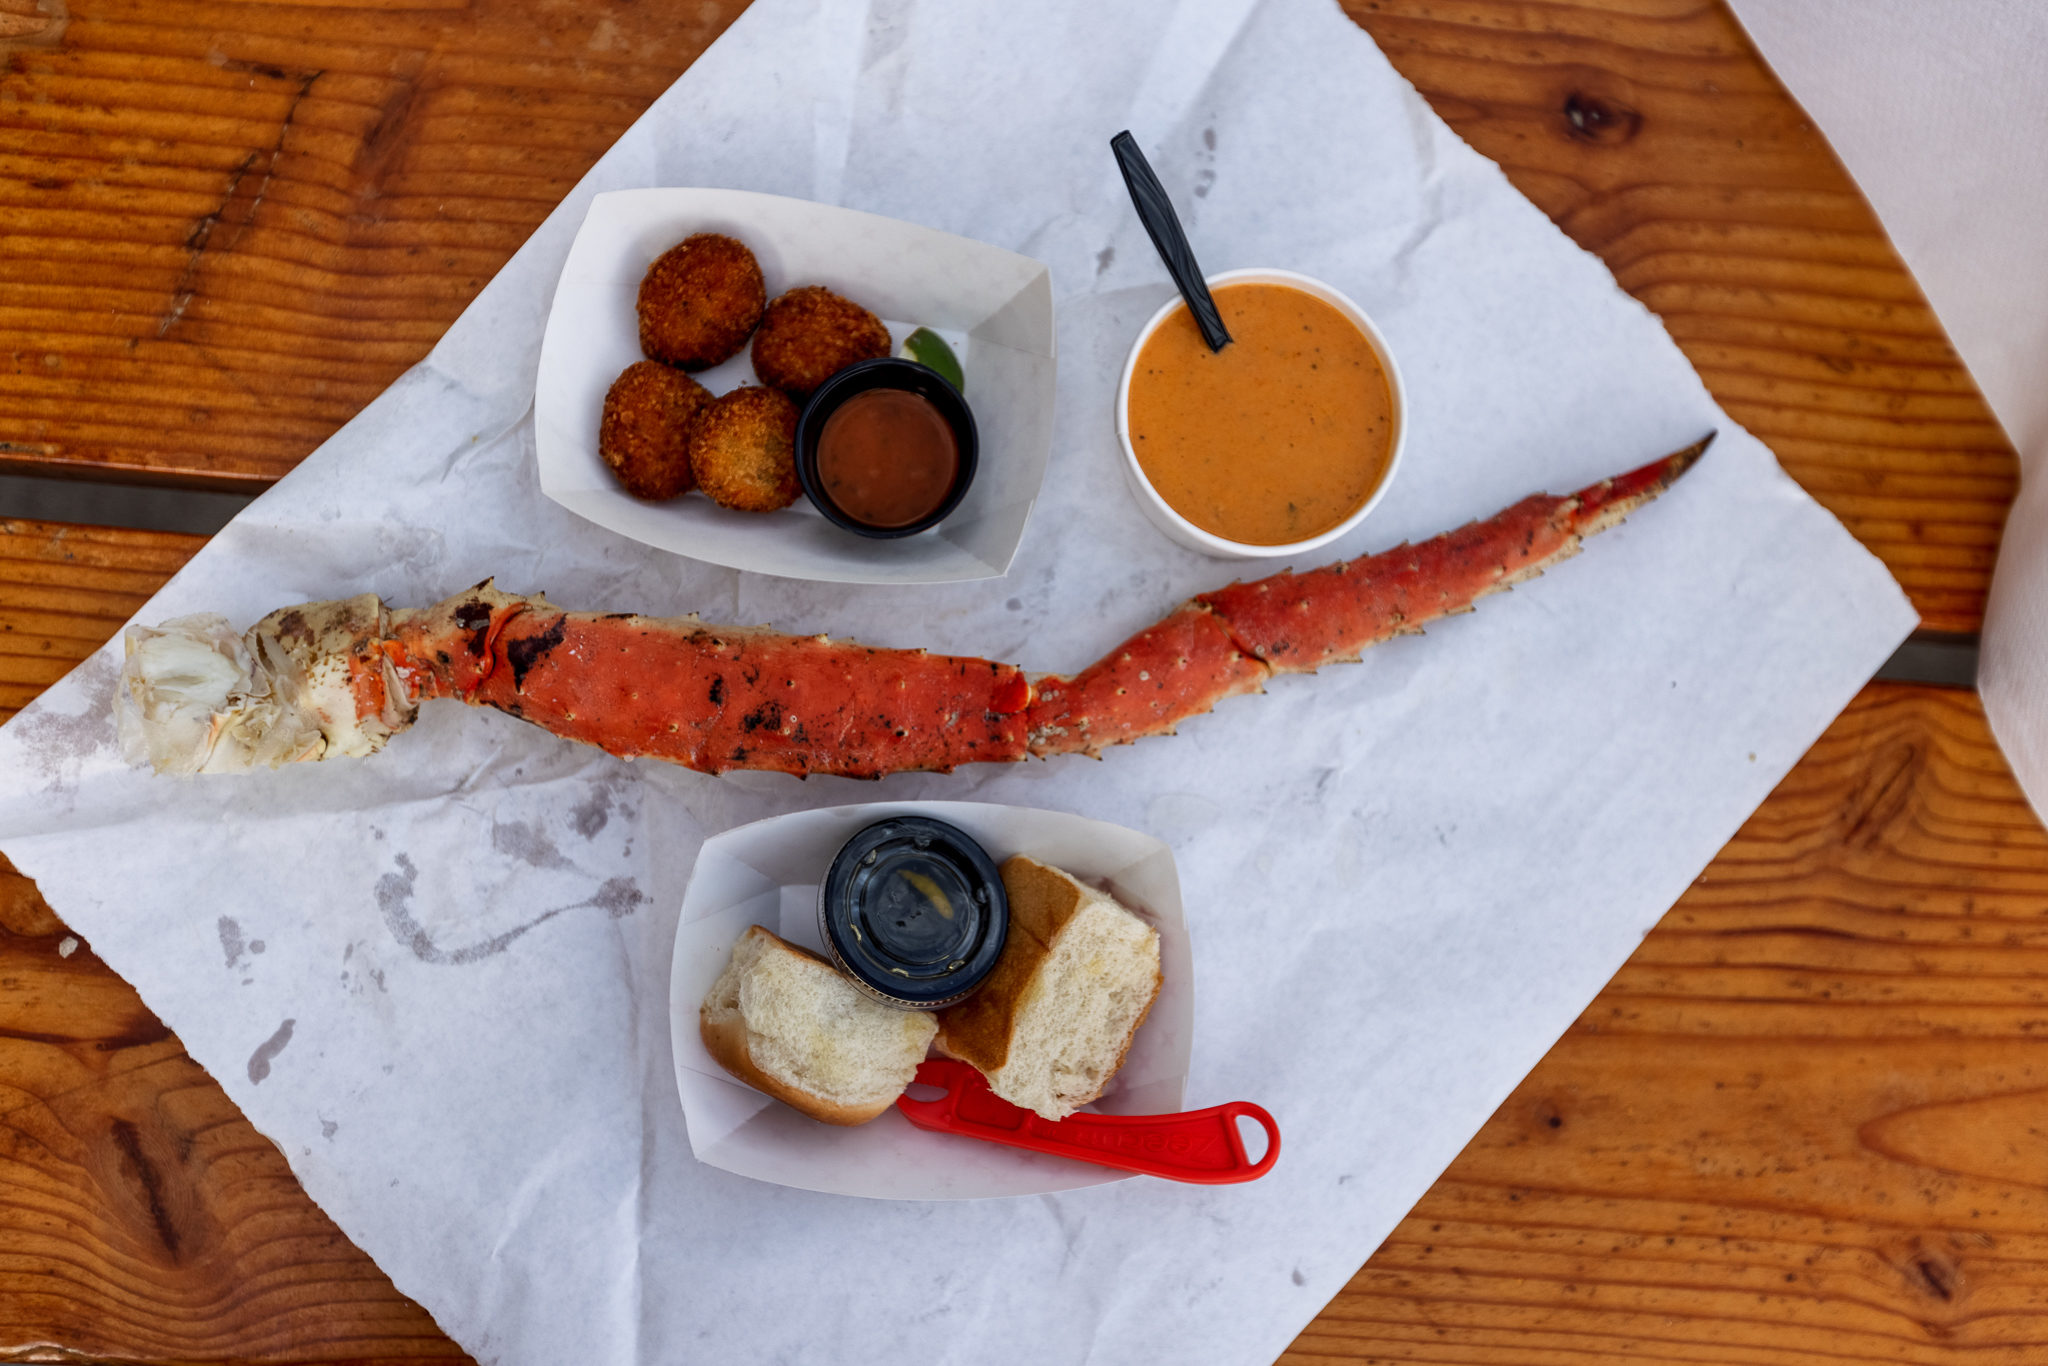 A king crab leg, crab bisque, rolls, and crab cakes from Tracy's King Crab Shack in Juneau